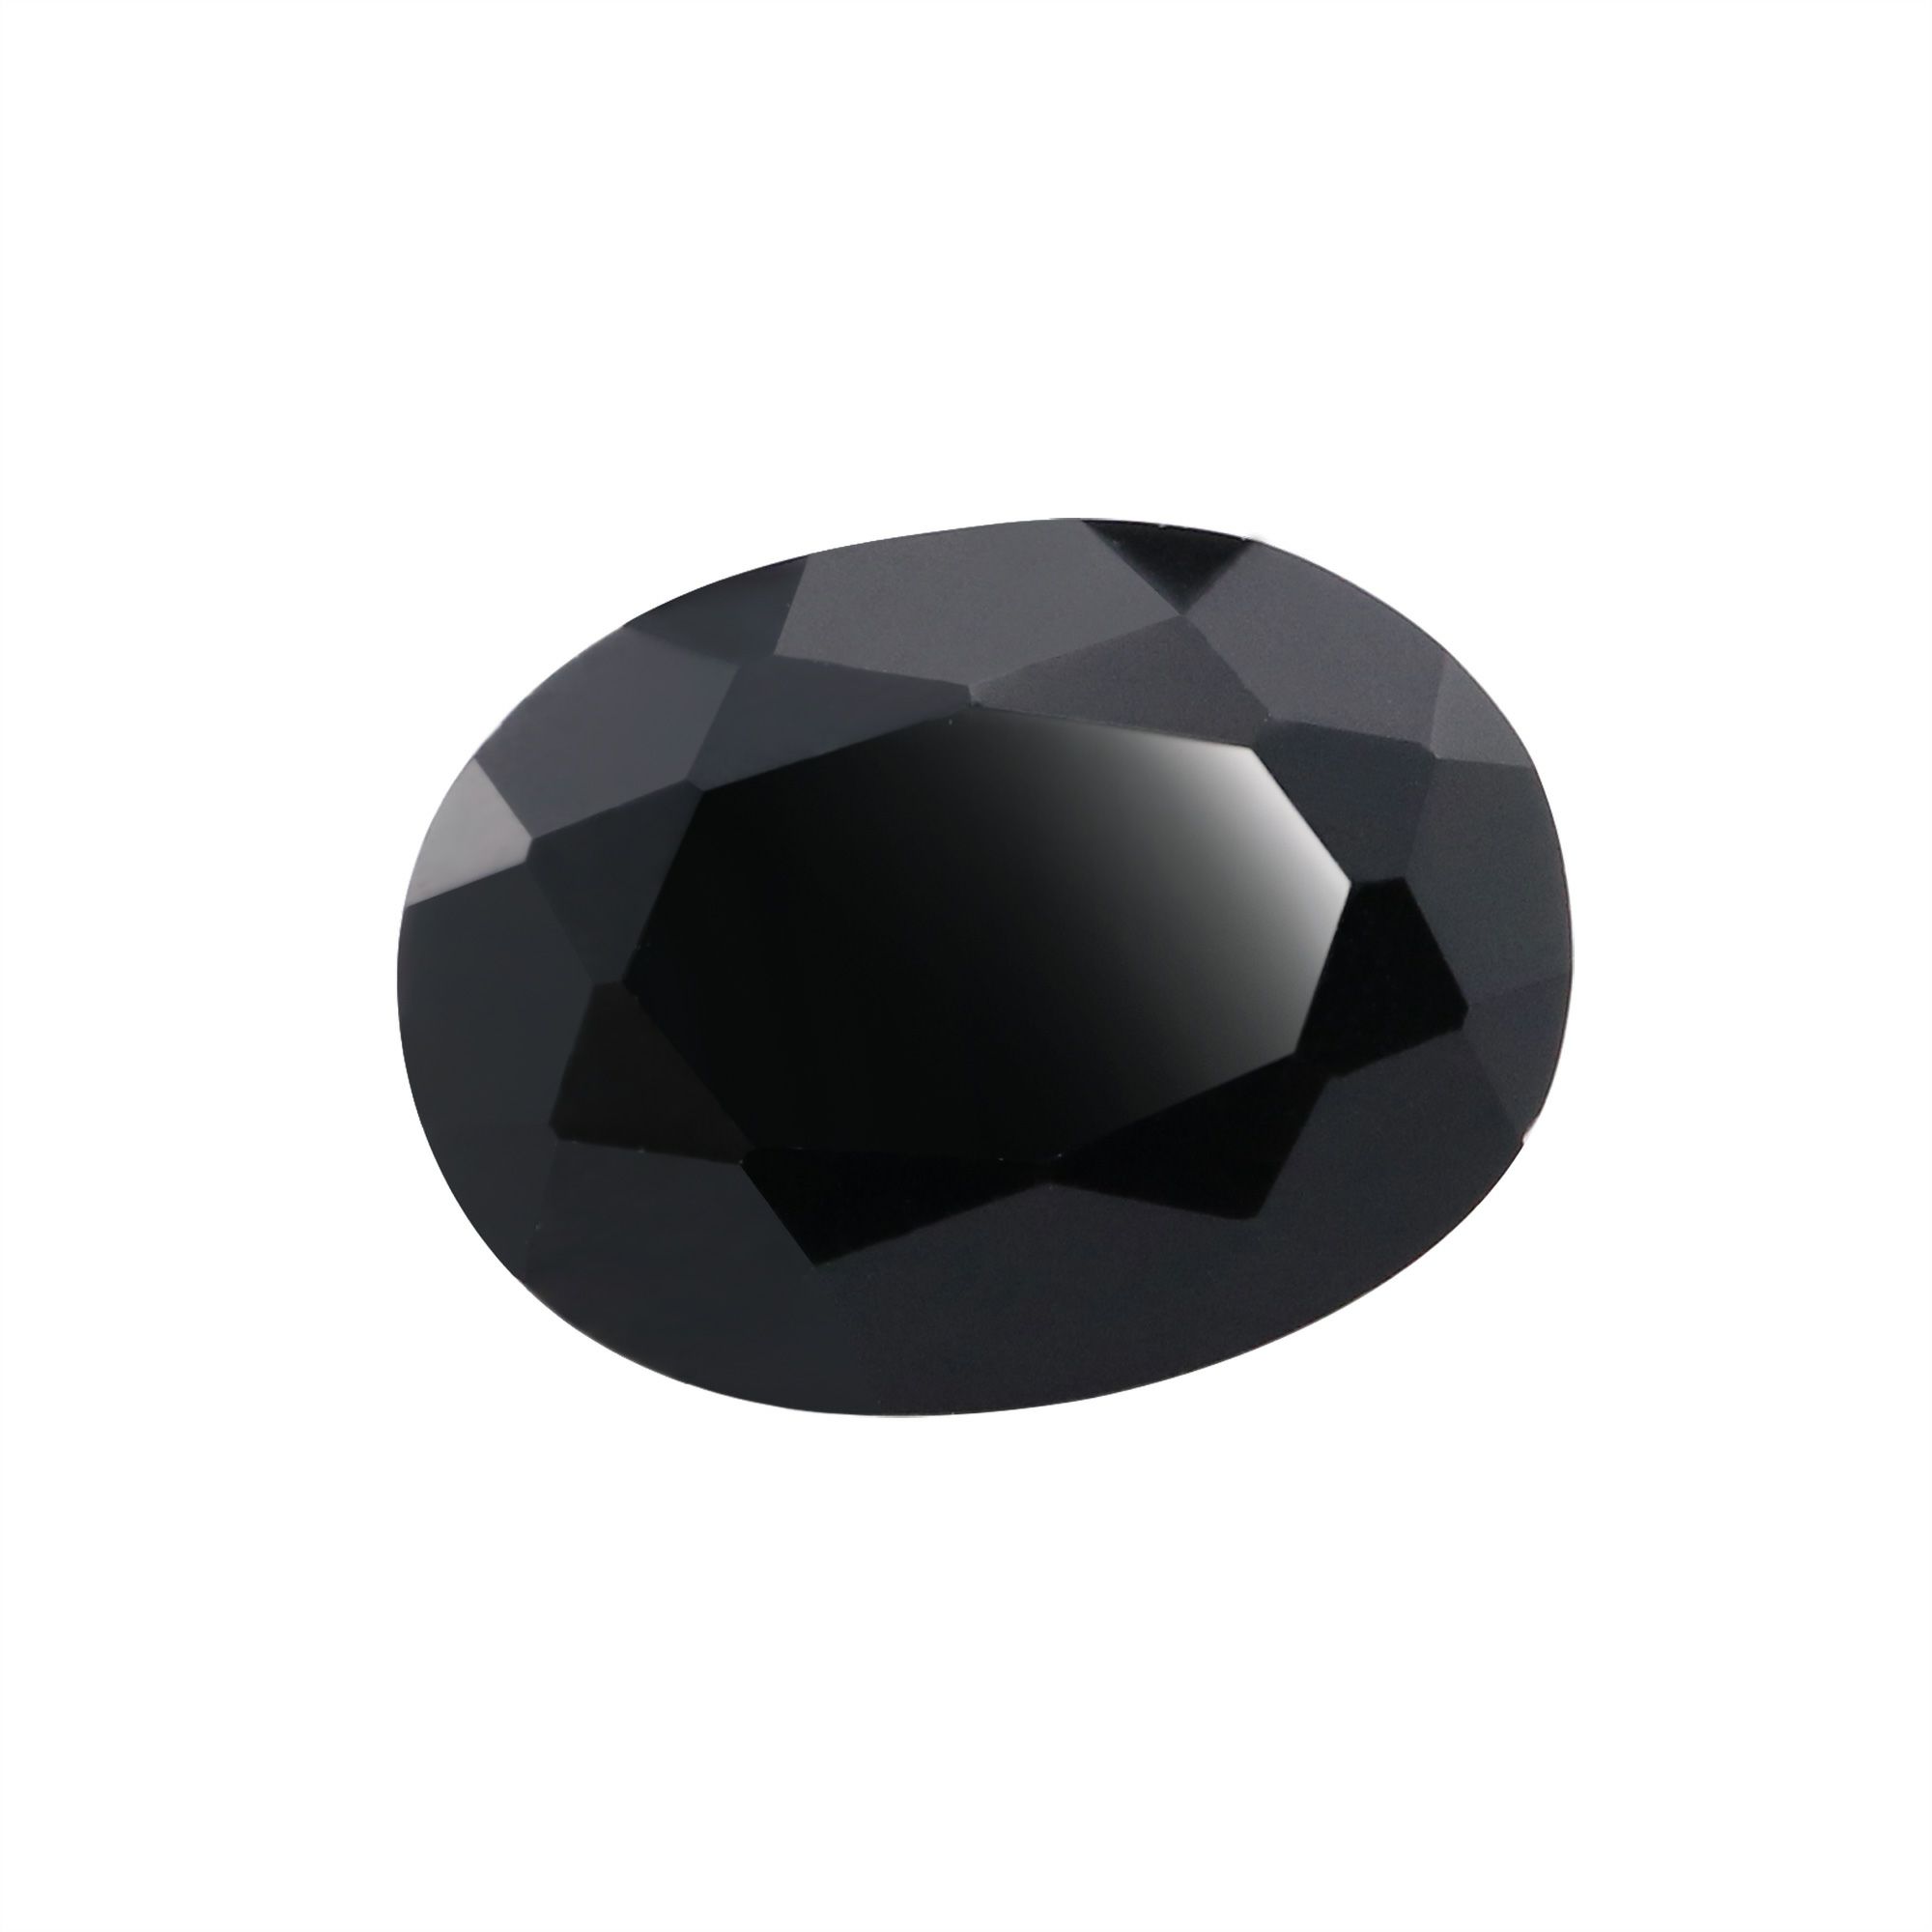 1Pcs Natural Oval Black Onyx Faceted Cut Loose Gemstone Nature Semi Precious Stone DIY Jewelry Supplies 4120129 - Click Image to Close